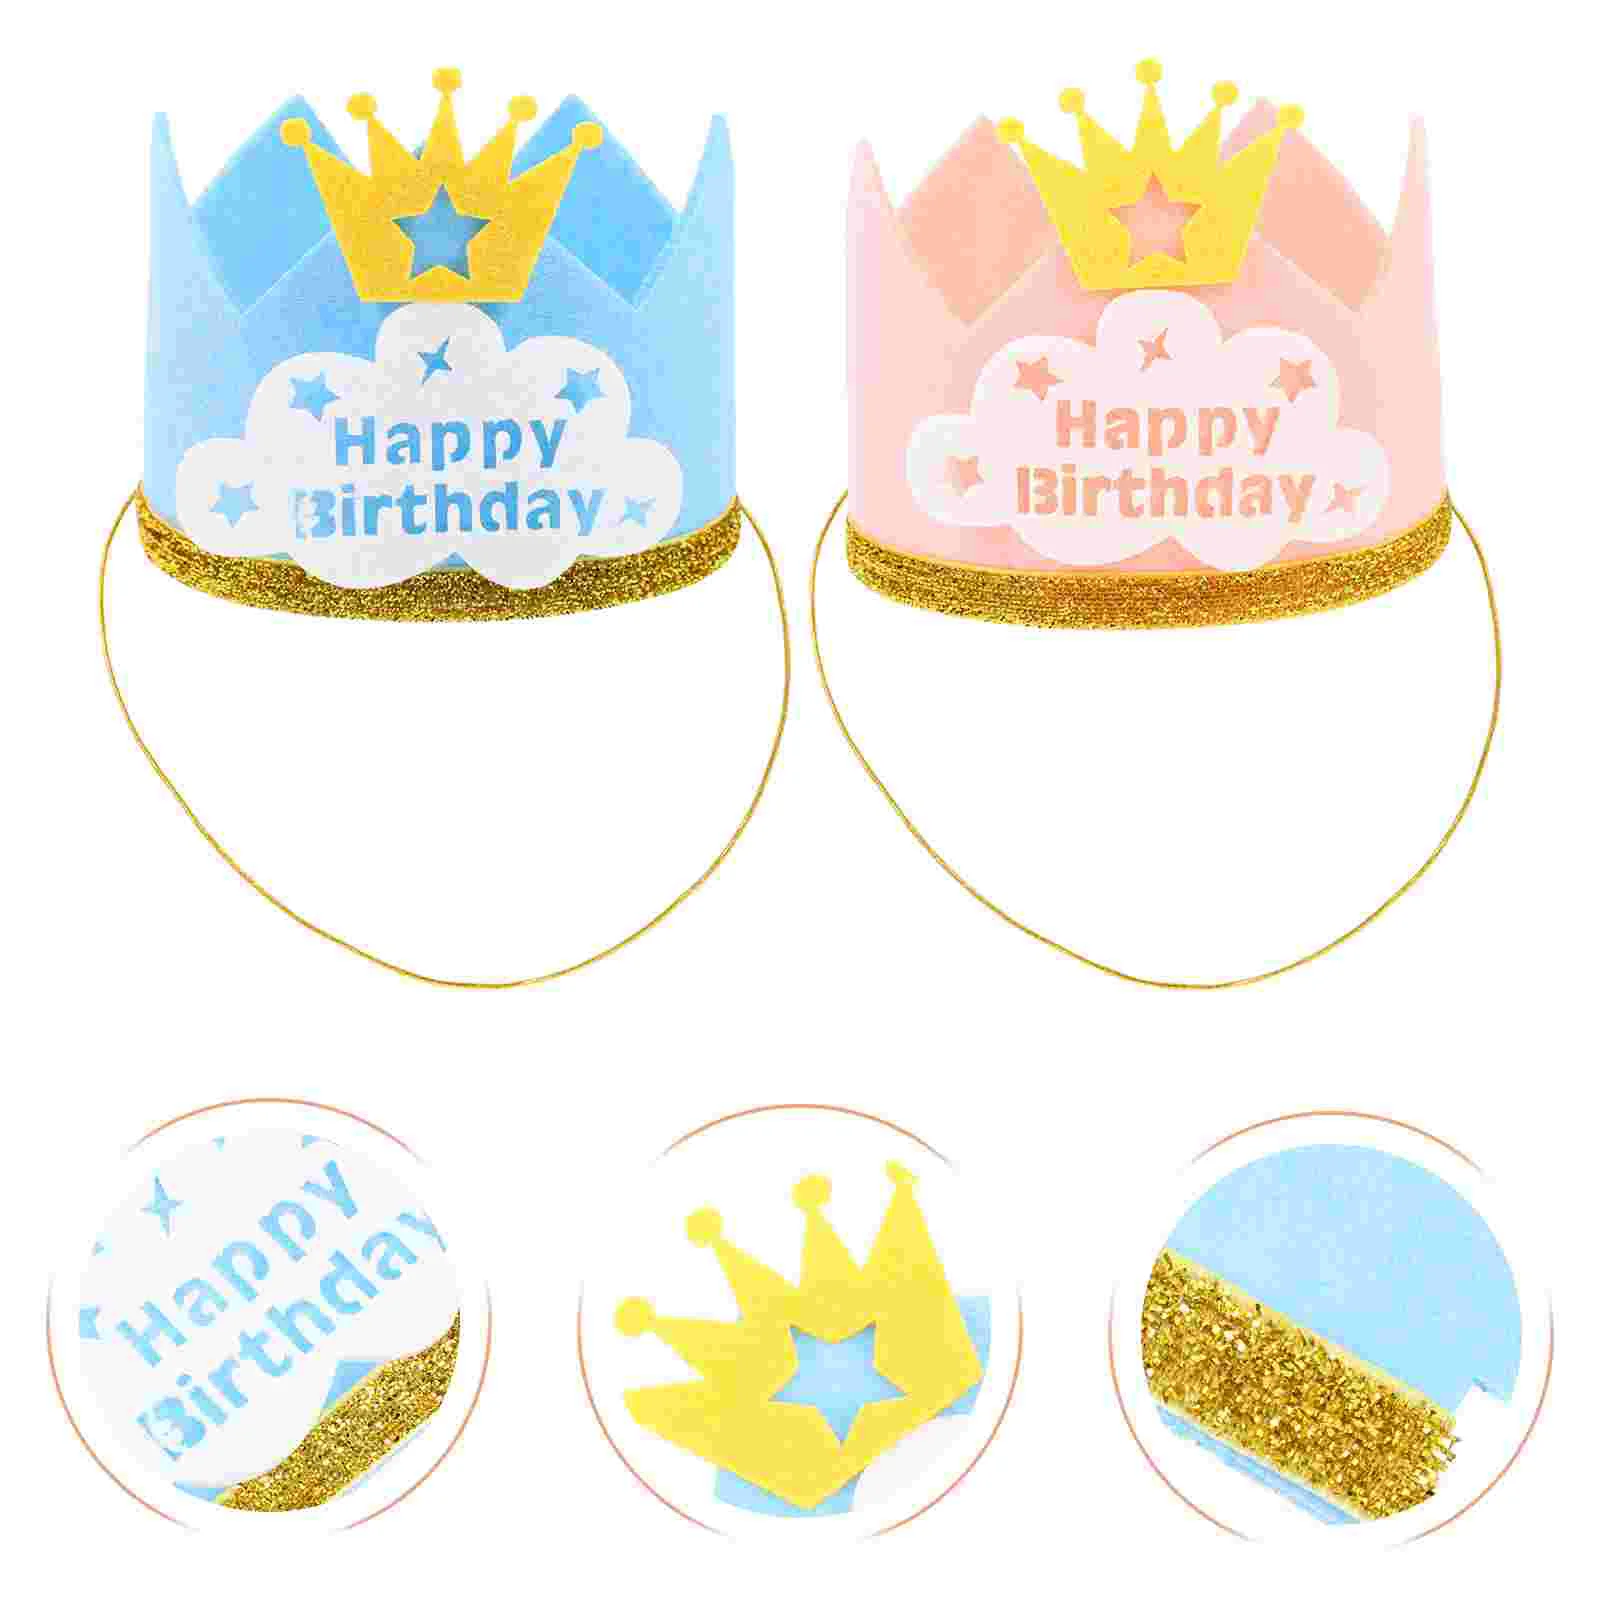 

Birthday Party Hathats Kids Happy Capsuppliescloth Paper Cone Kid Classroom Decoration Bridal Costume Baby Tiara Celebration